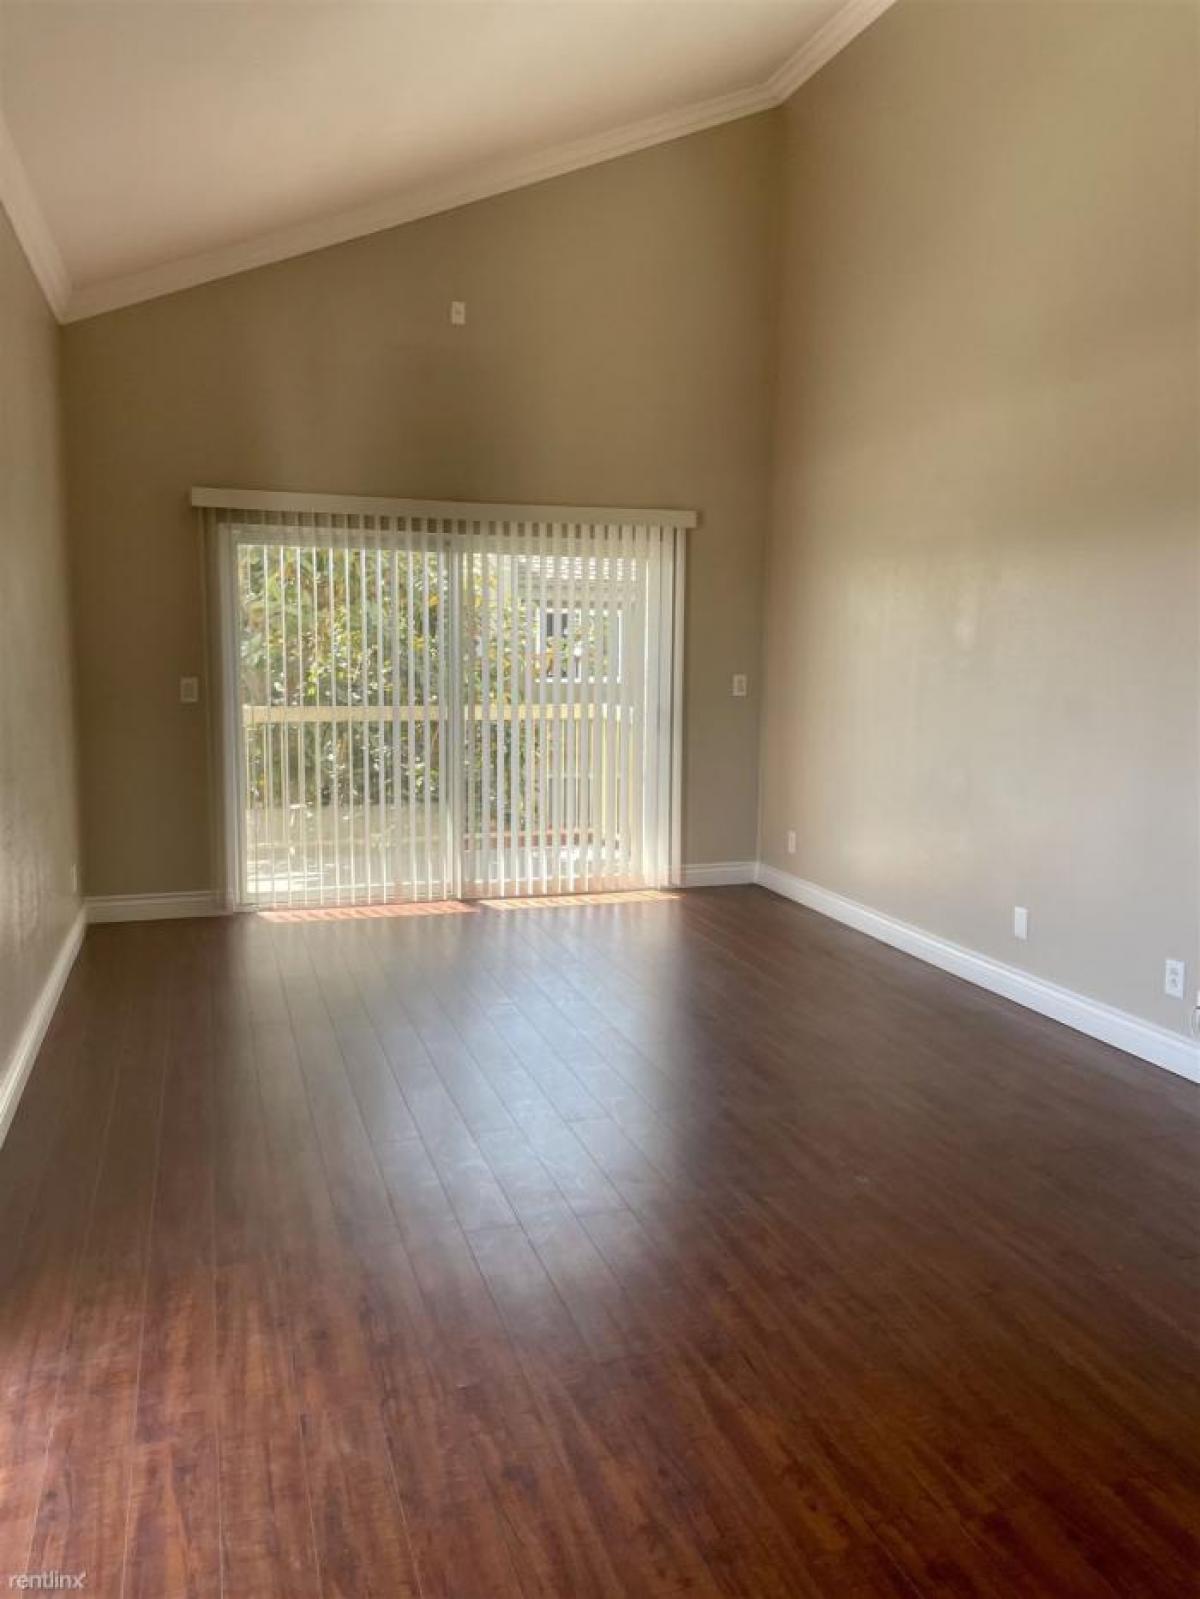 Picture of Apartment For Rent in Garden Grove, California, United States